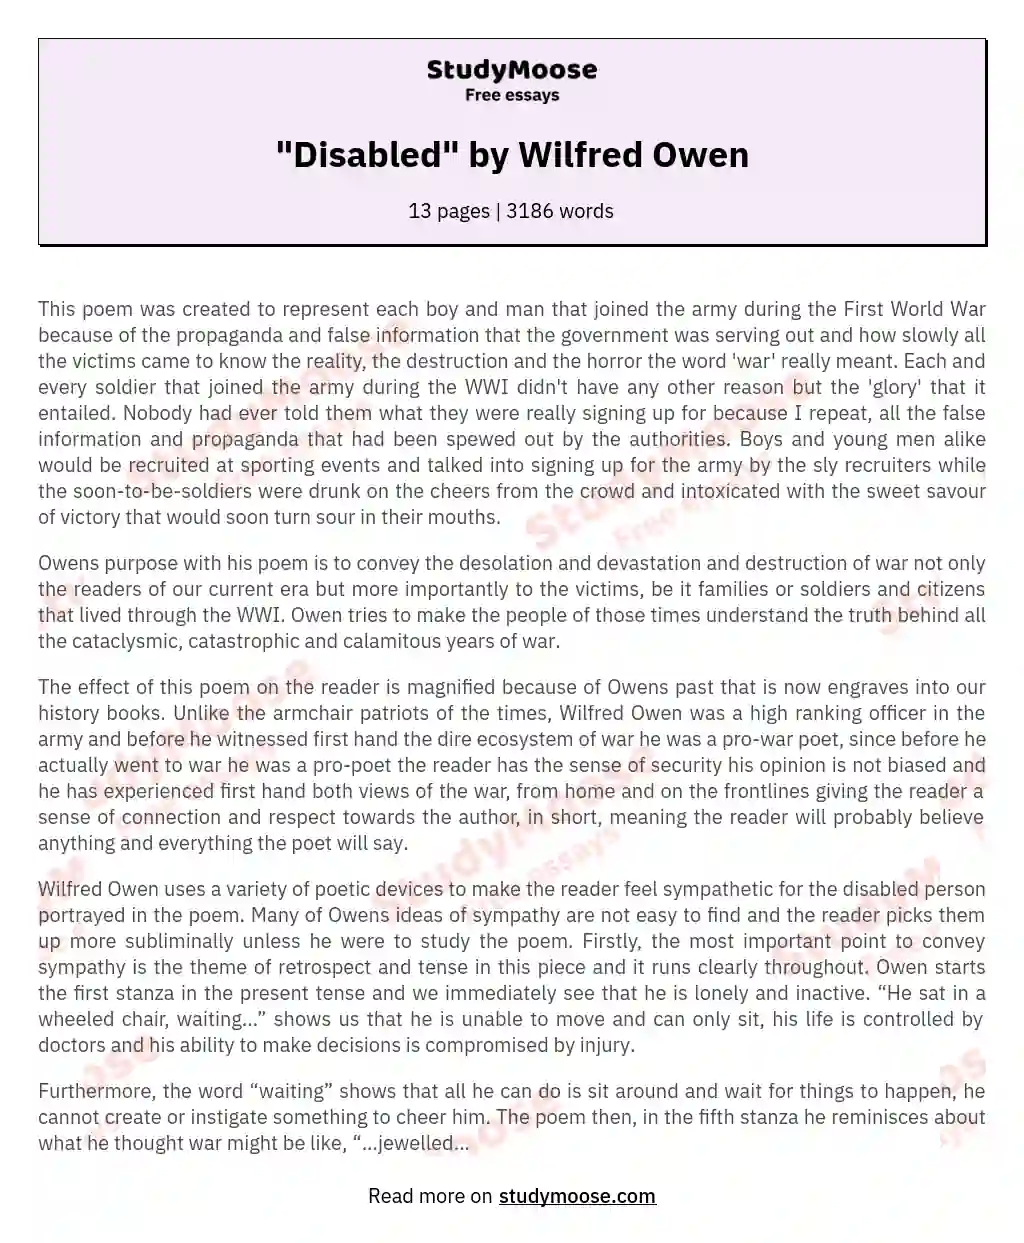 "Disabled" by Wilfred Owen